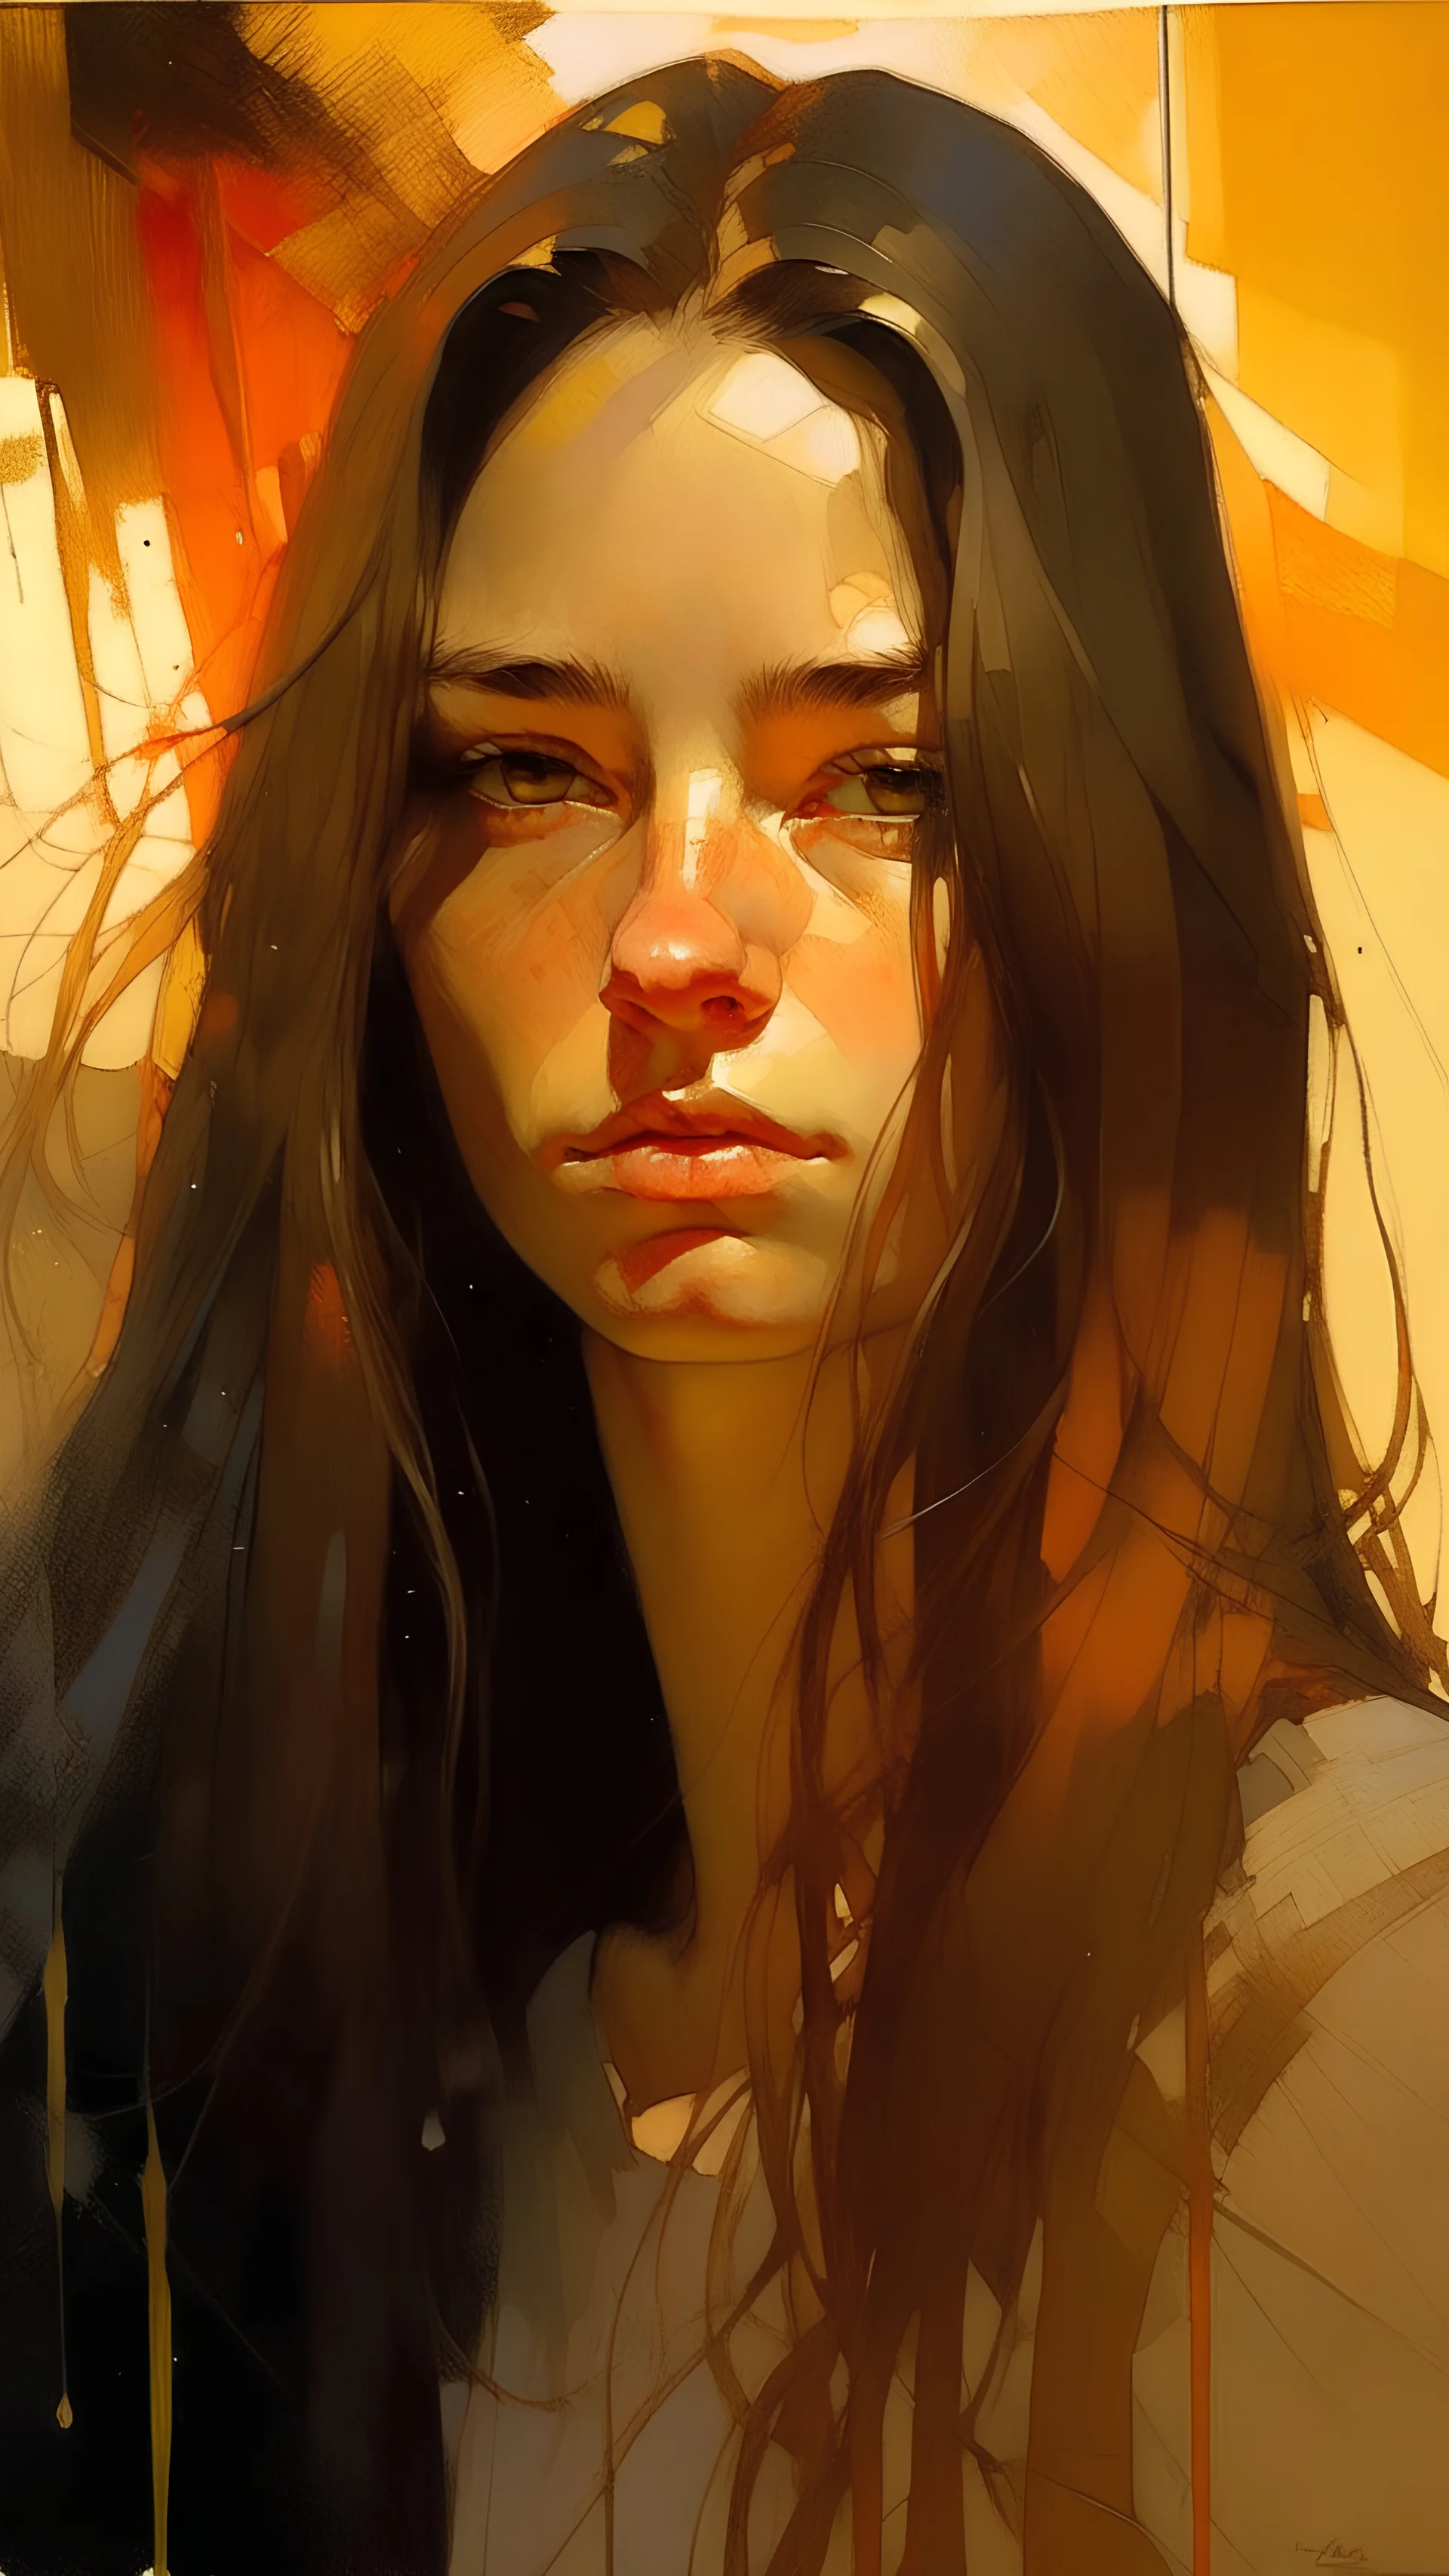 A Breathtaking Painting Depicting A Portrait Of A Young Woman With Long Hair And Captivating Eyes In Sunlight By Alex Maleev, And Miles Johnston, Elegant And Emotive Facial Expressions, Incorporating Delicate Washes And Mesmerizing Warm Tones, Truly Masterpiece Of Art, Golden Hour, Masterpiece, Alluring Expression, Intricate Artwork